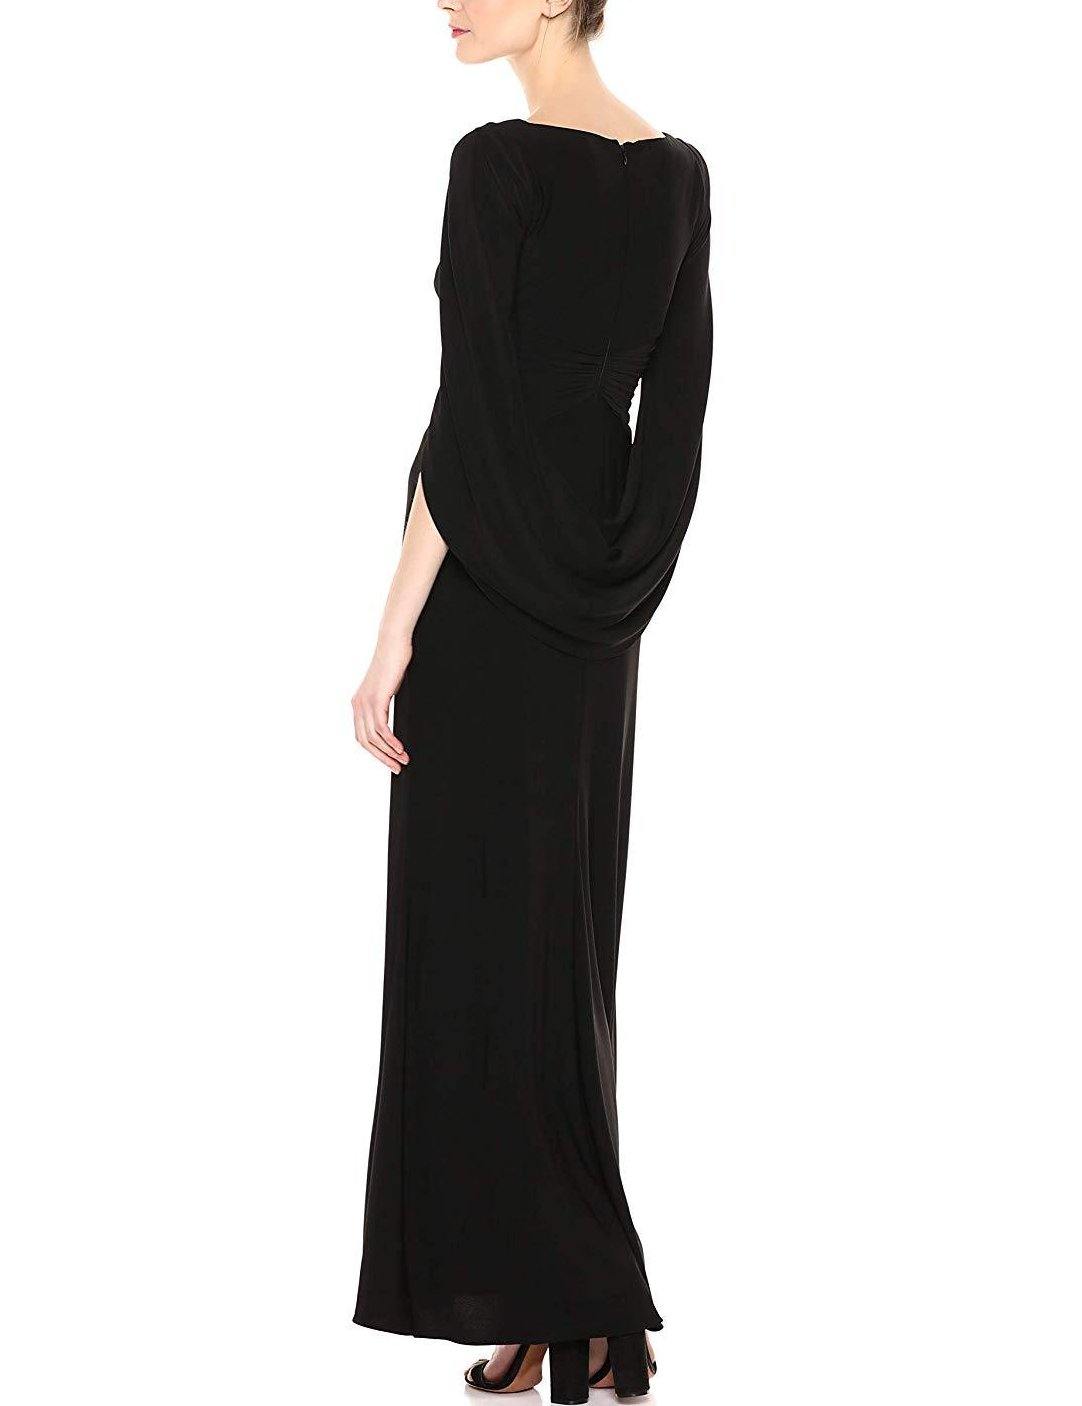 Adrianna Papell Long V-Neck Crossed Front Formal Jersey Dress - The Dress Outlet Adrianna Papell